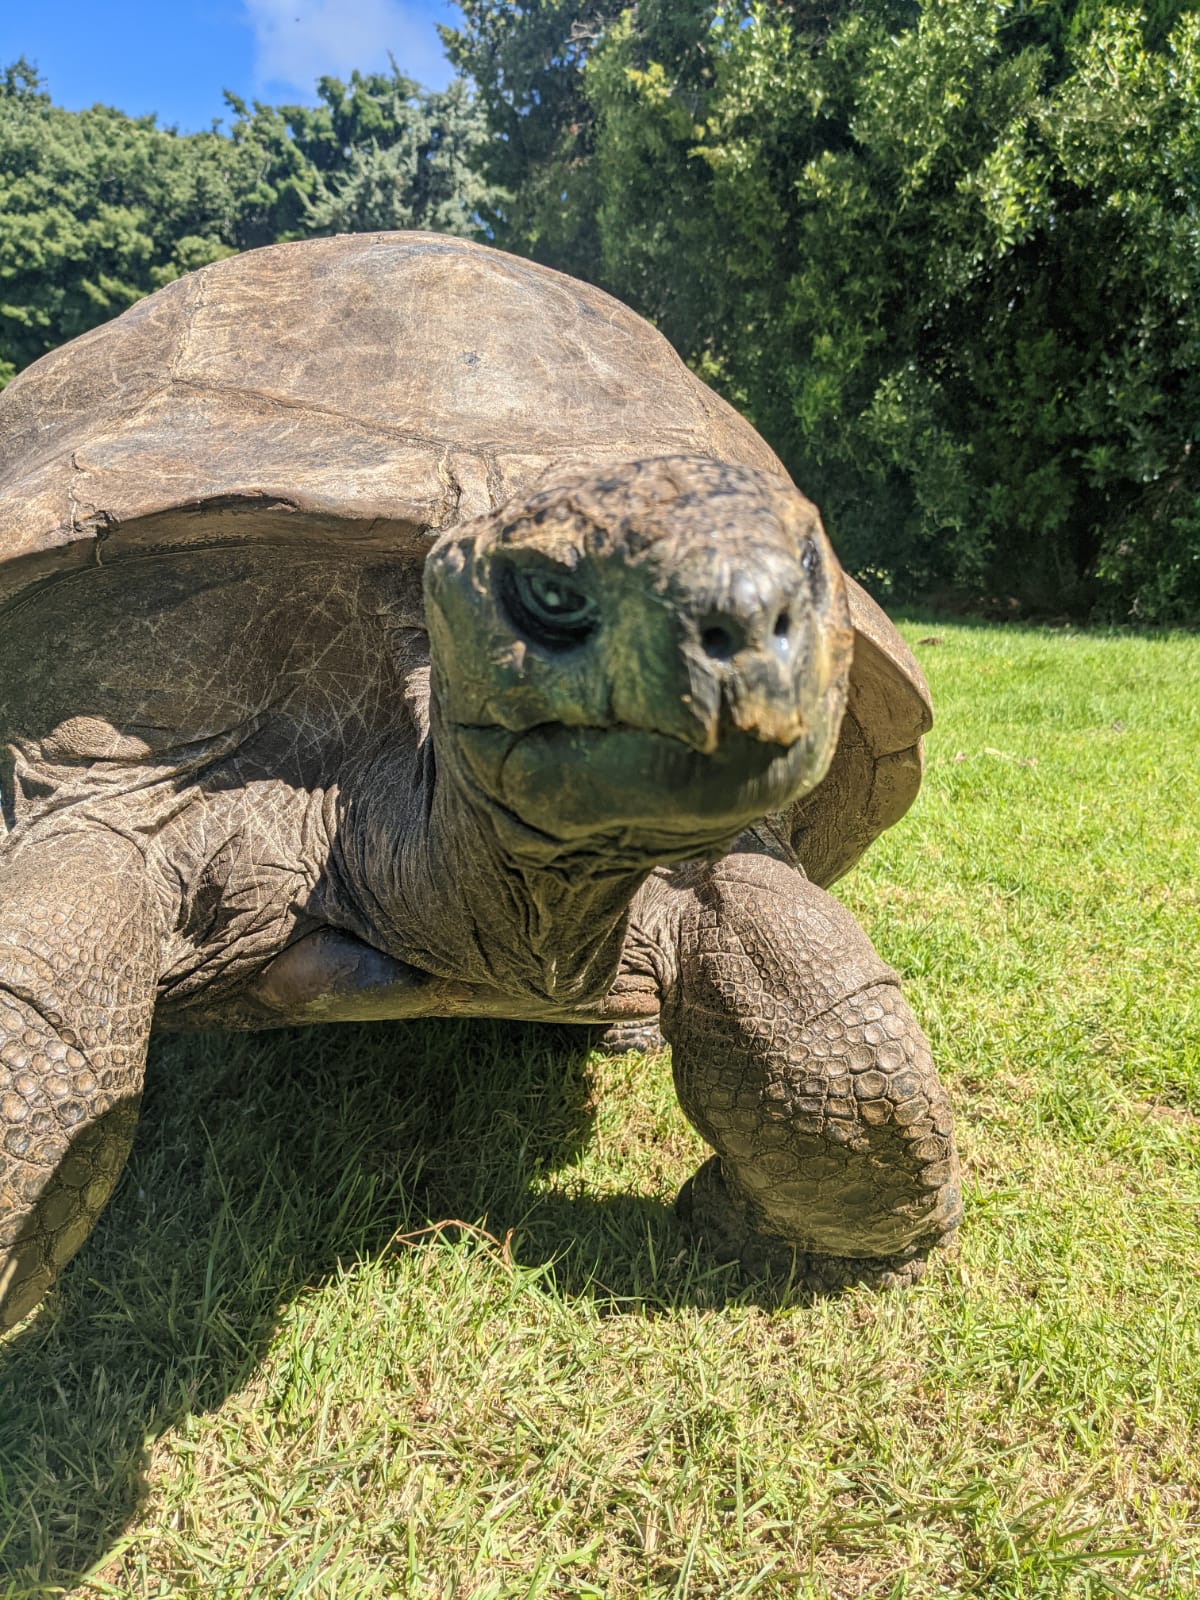 How old is Jonathan the giant tortoise?